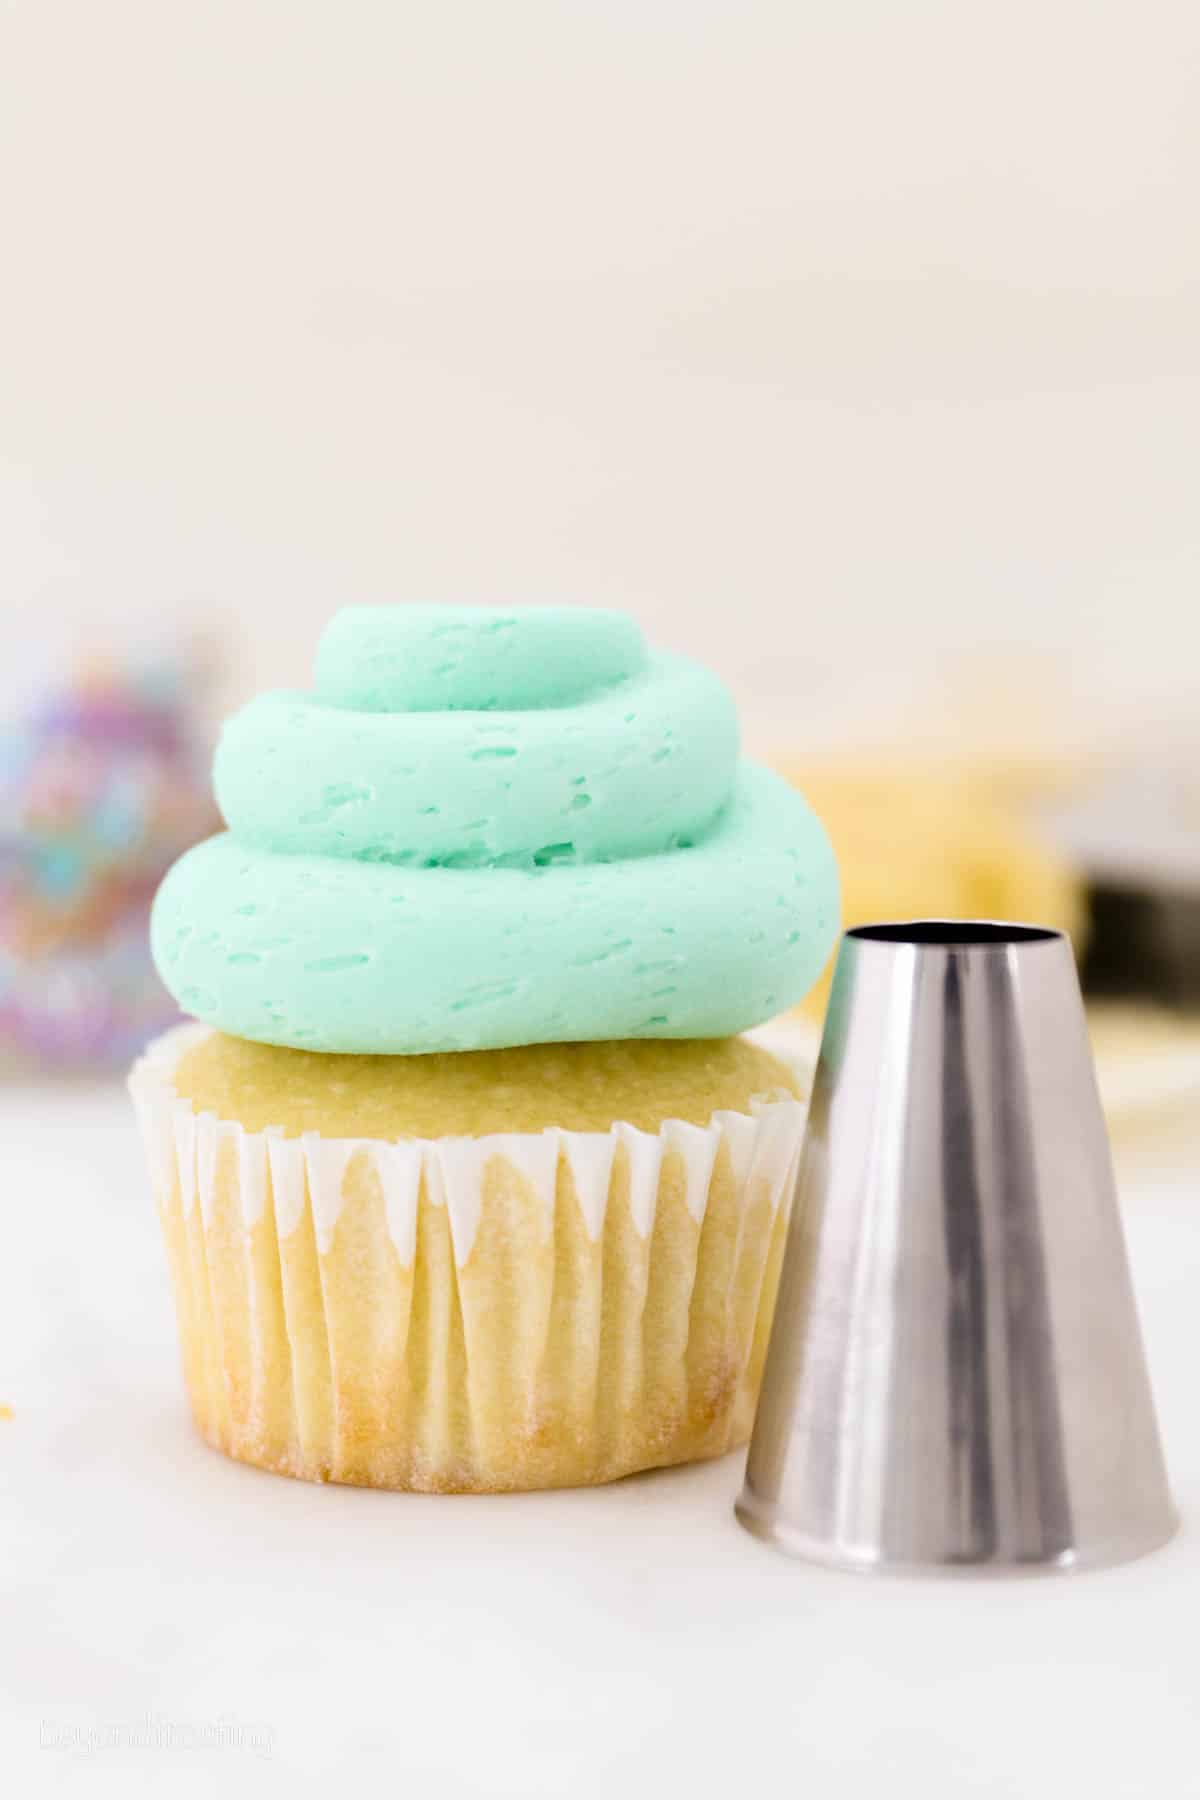 A cupcake frosted with a swirl of teal buttercream piped from am Ateco 808 piping tip.